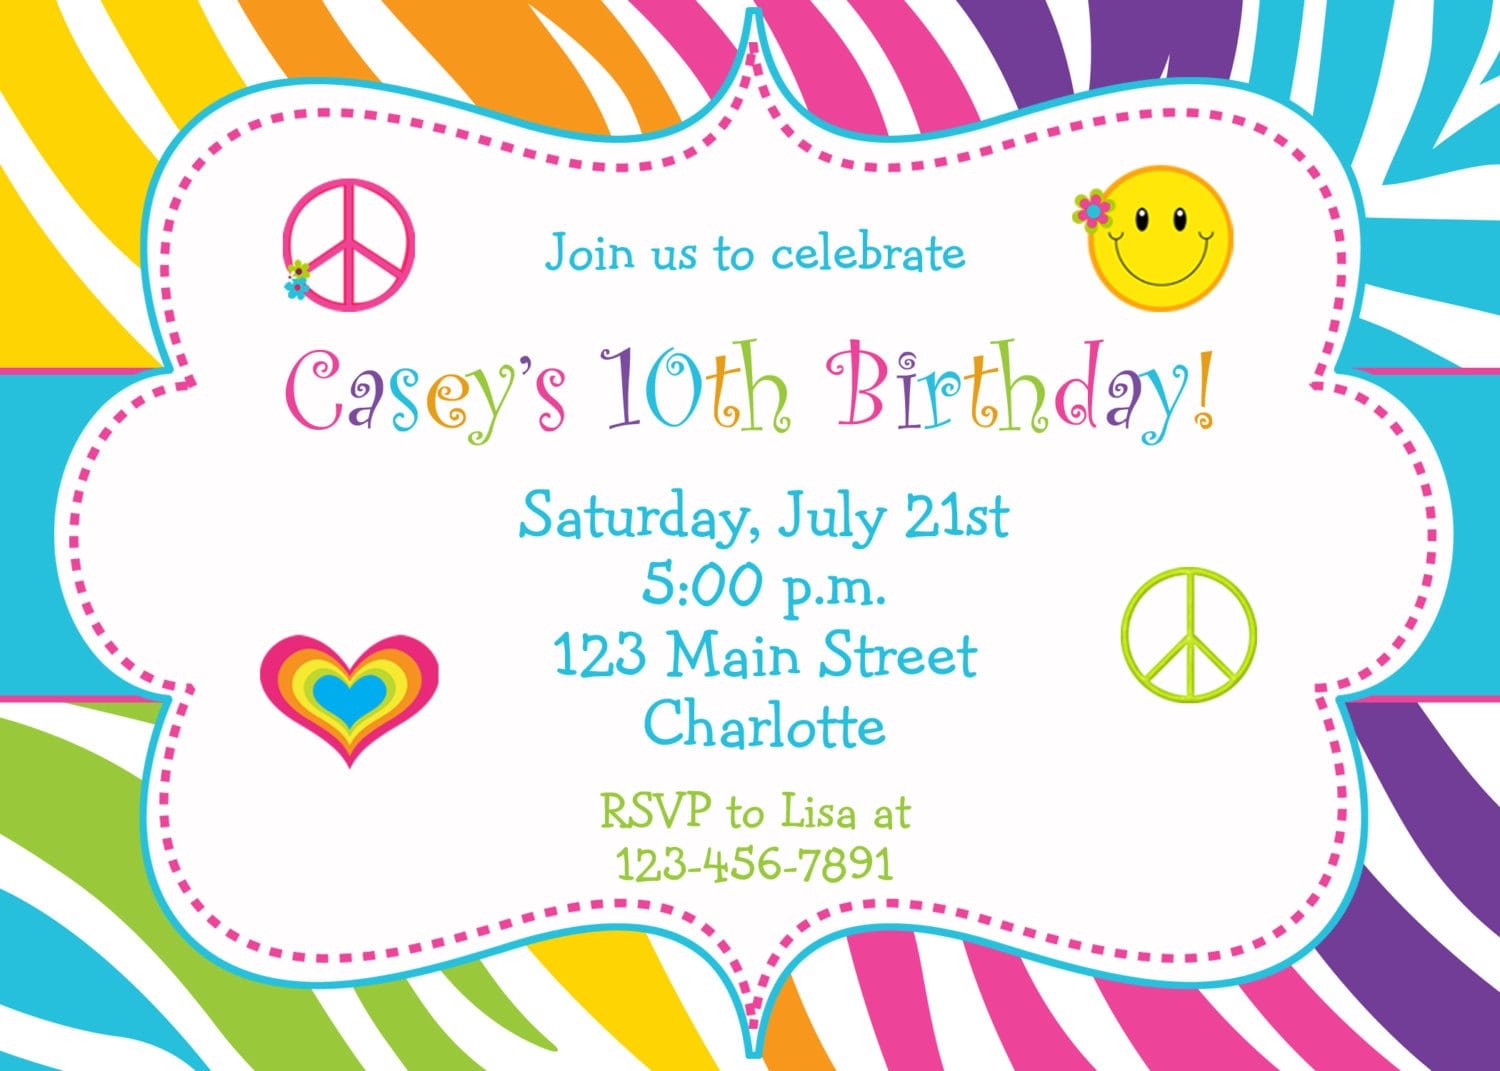 email-birthday-party-invitations